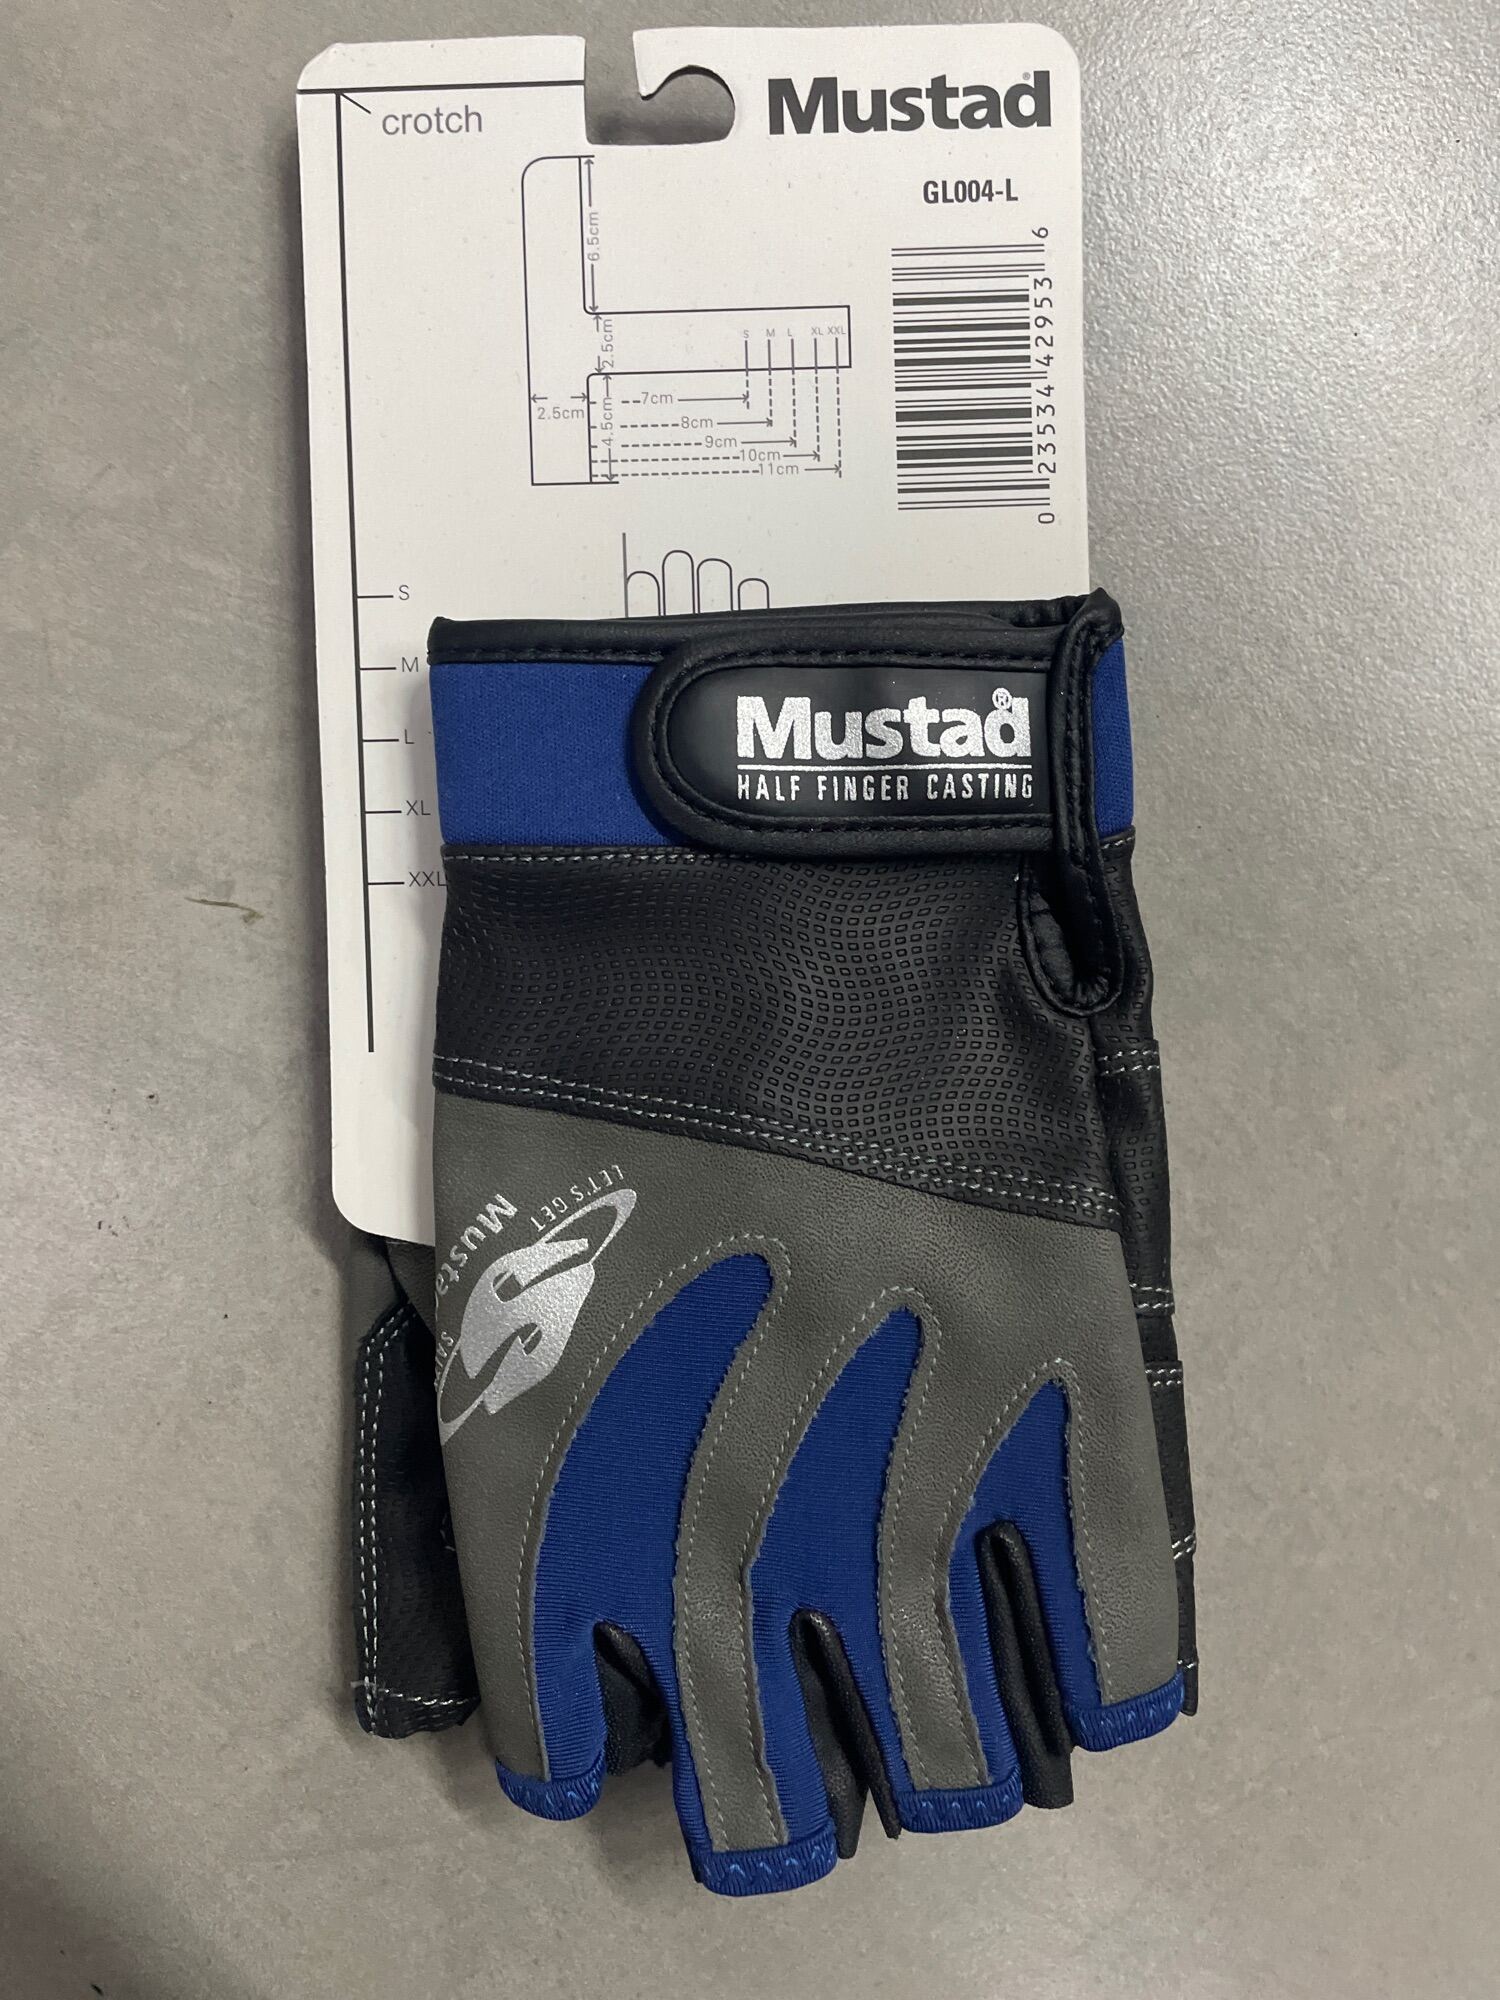 fishing gloves mustad - Buy fishing gloves mustad at Best Price in